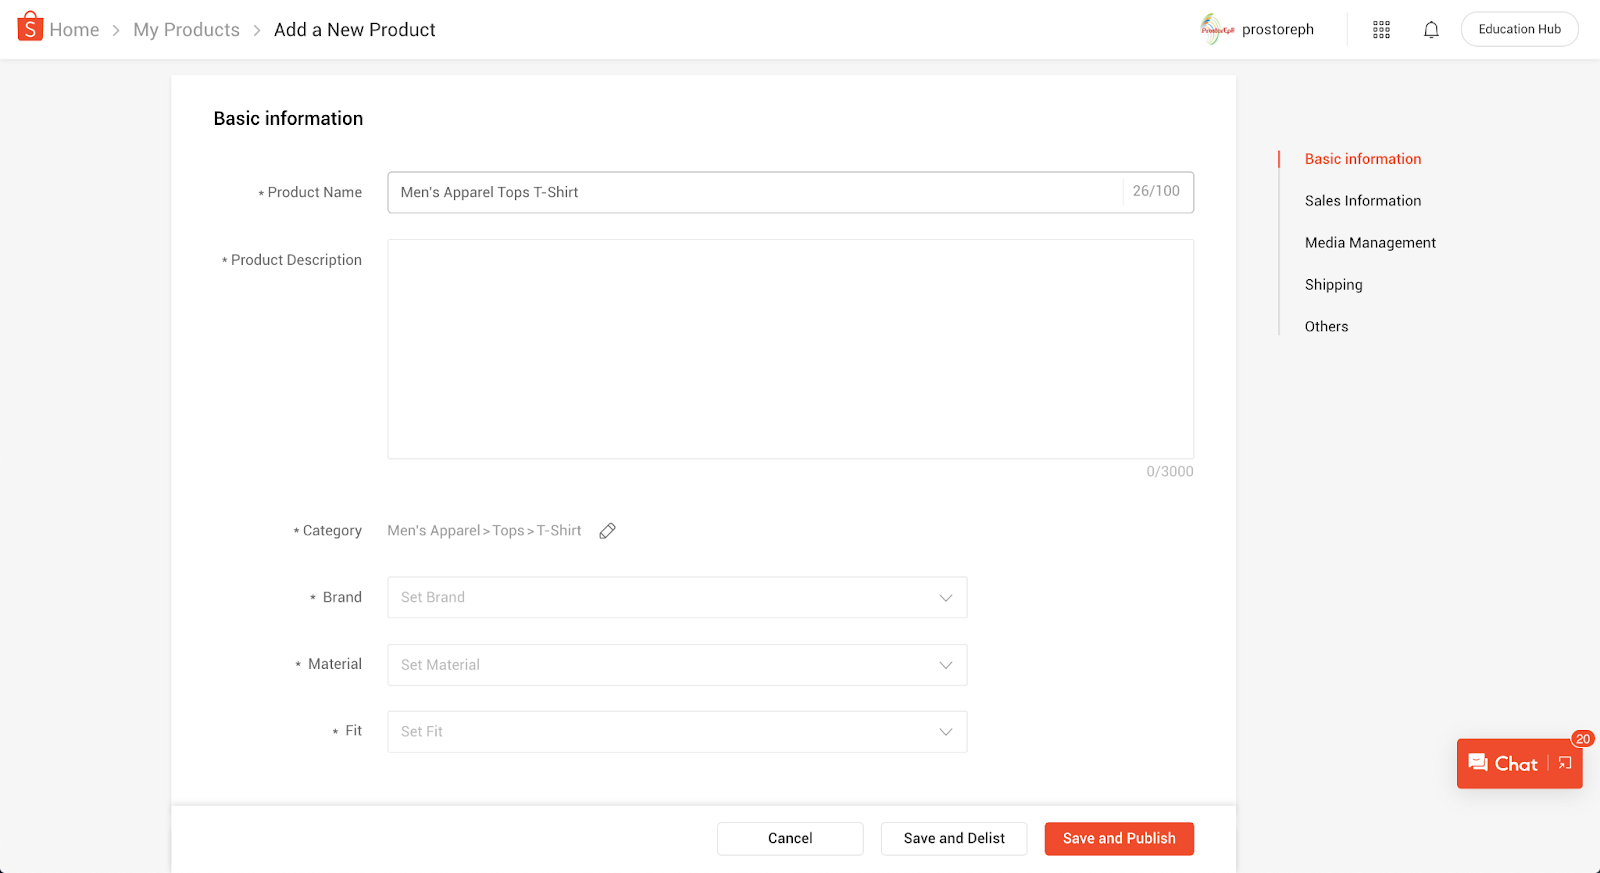 Step-by-step Guide to Become a Shopee Philippines Seller